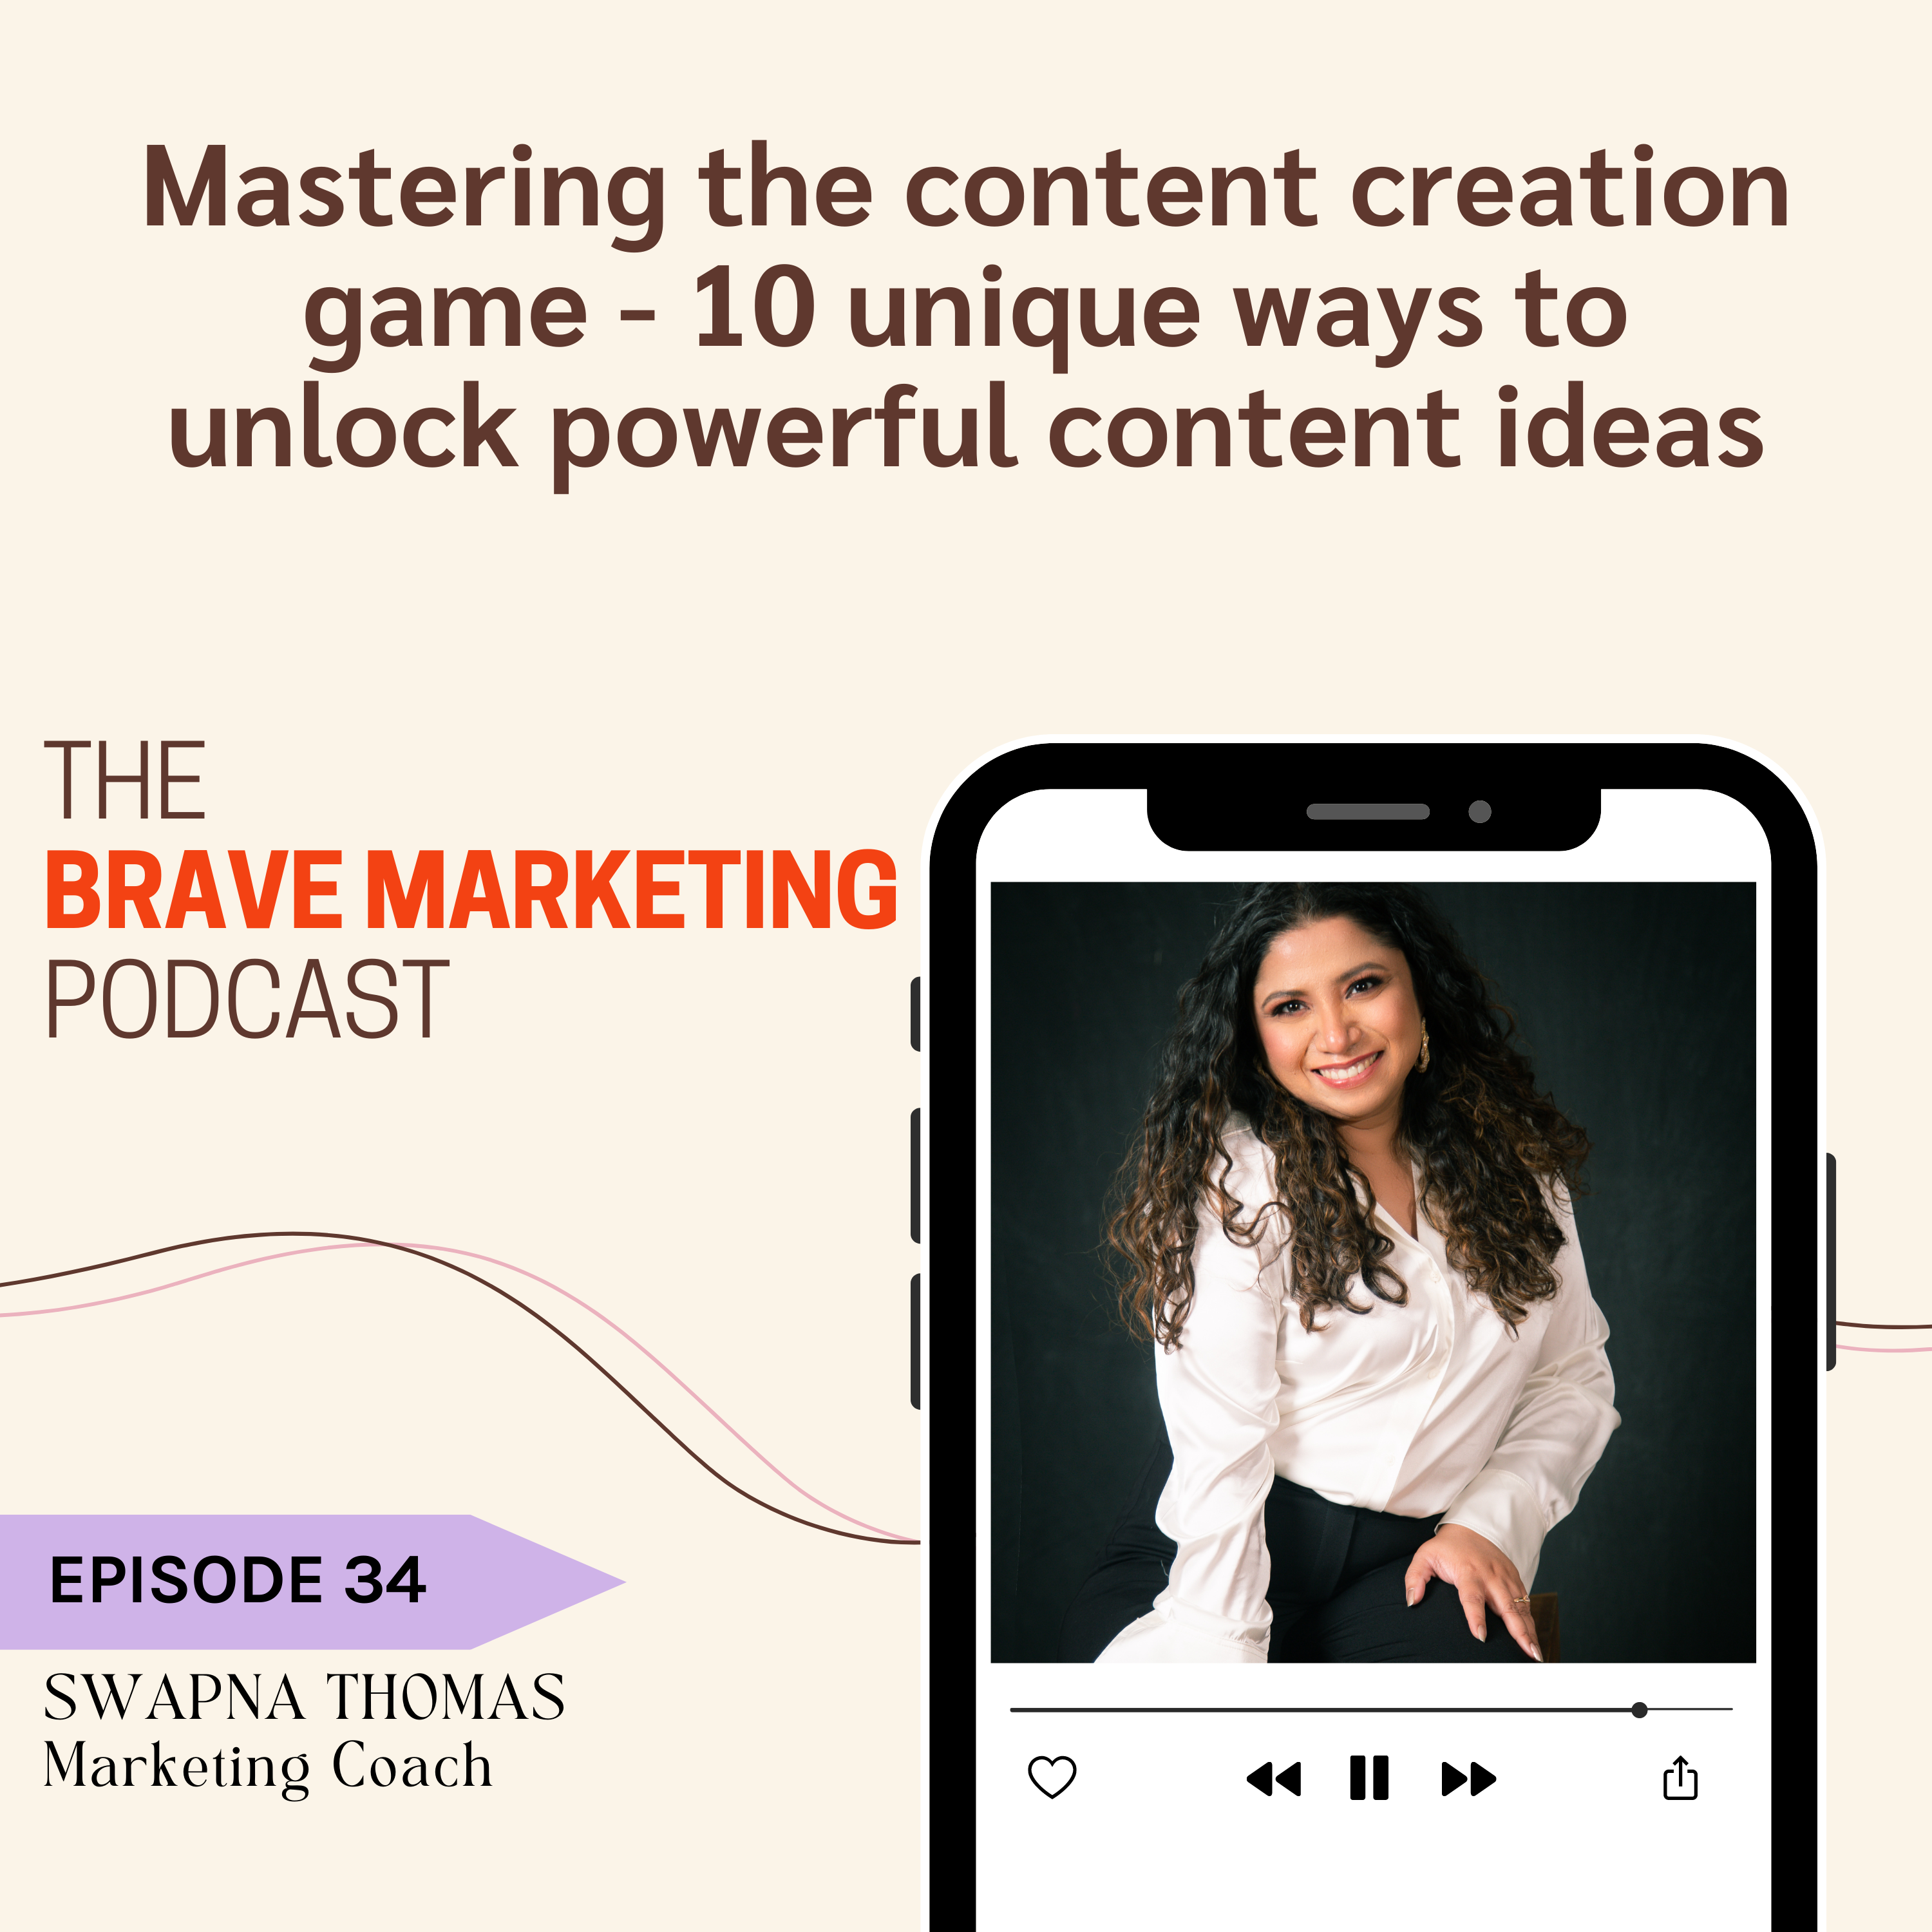 Mastering the content creation game - 10 unique ways to unlock powerful content ideas